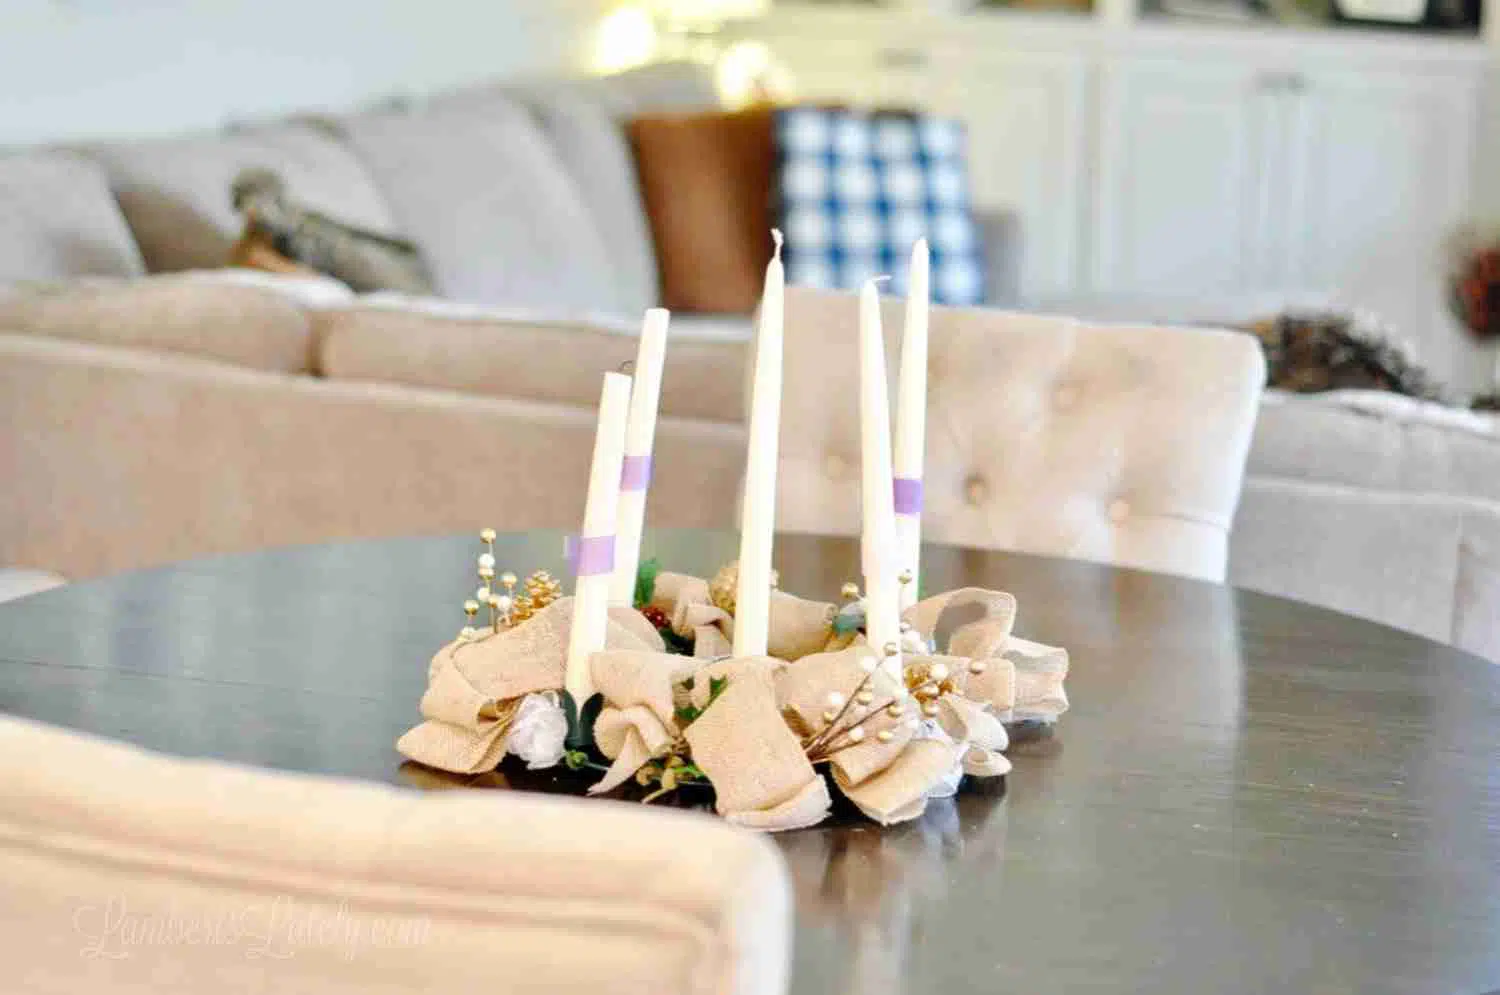 advent candles on a kitchen table.